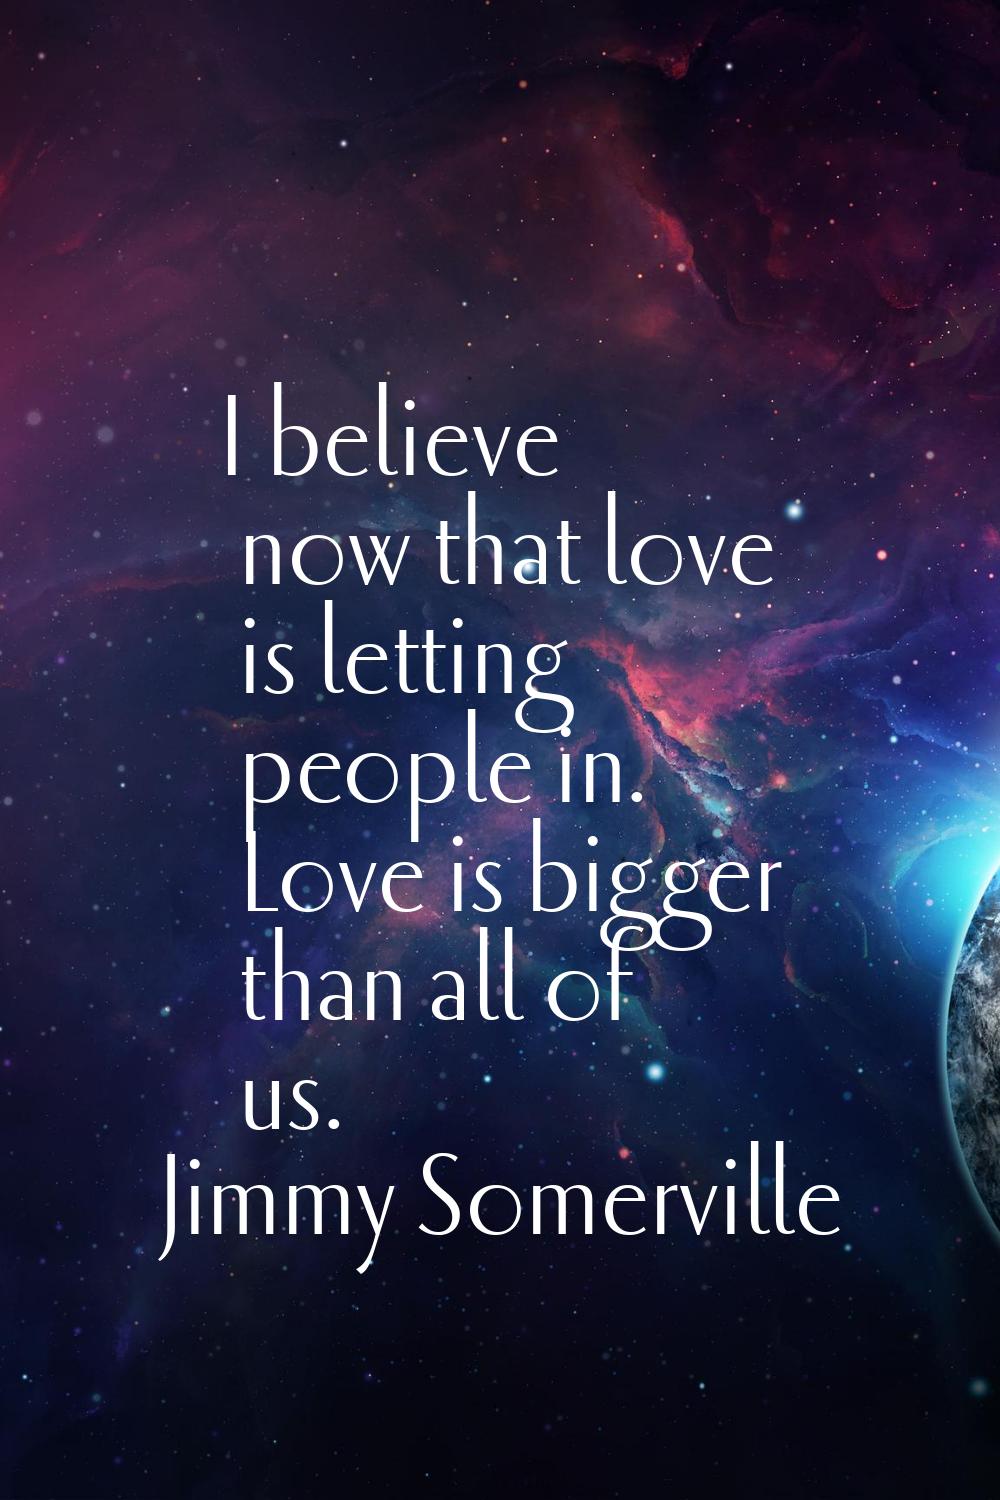 I believe now that love is letting people in. Love is bigger than all of us.